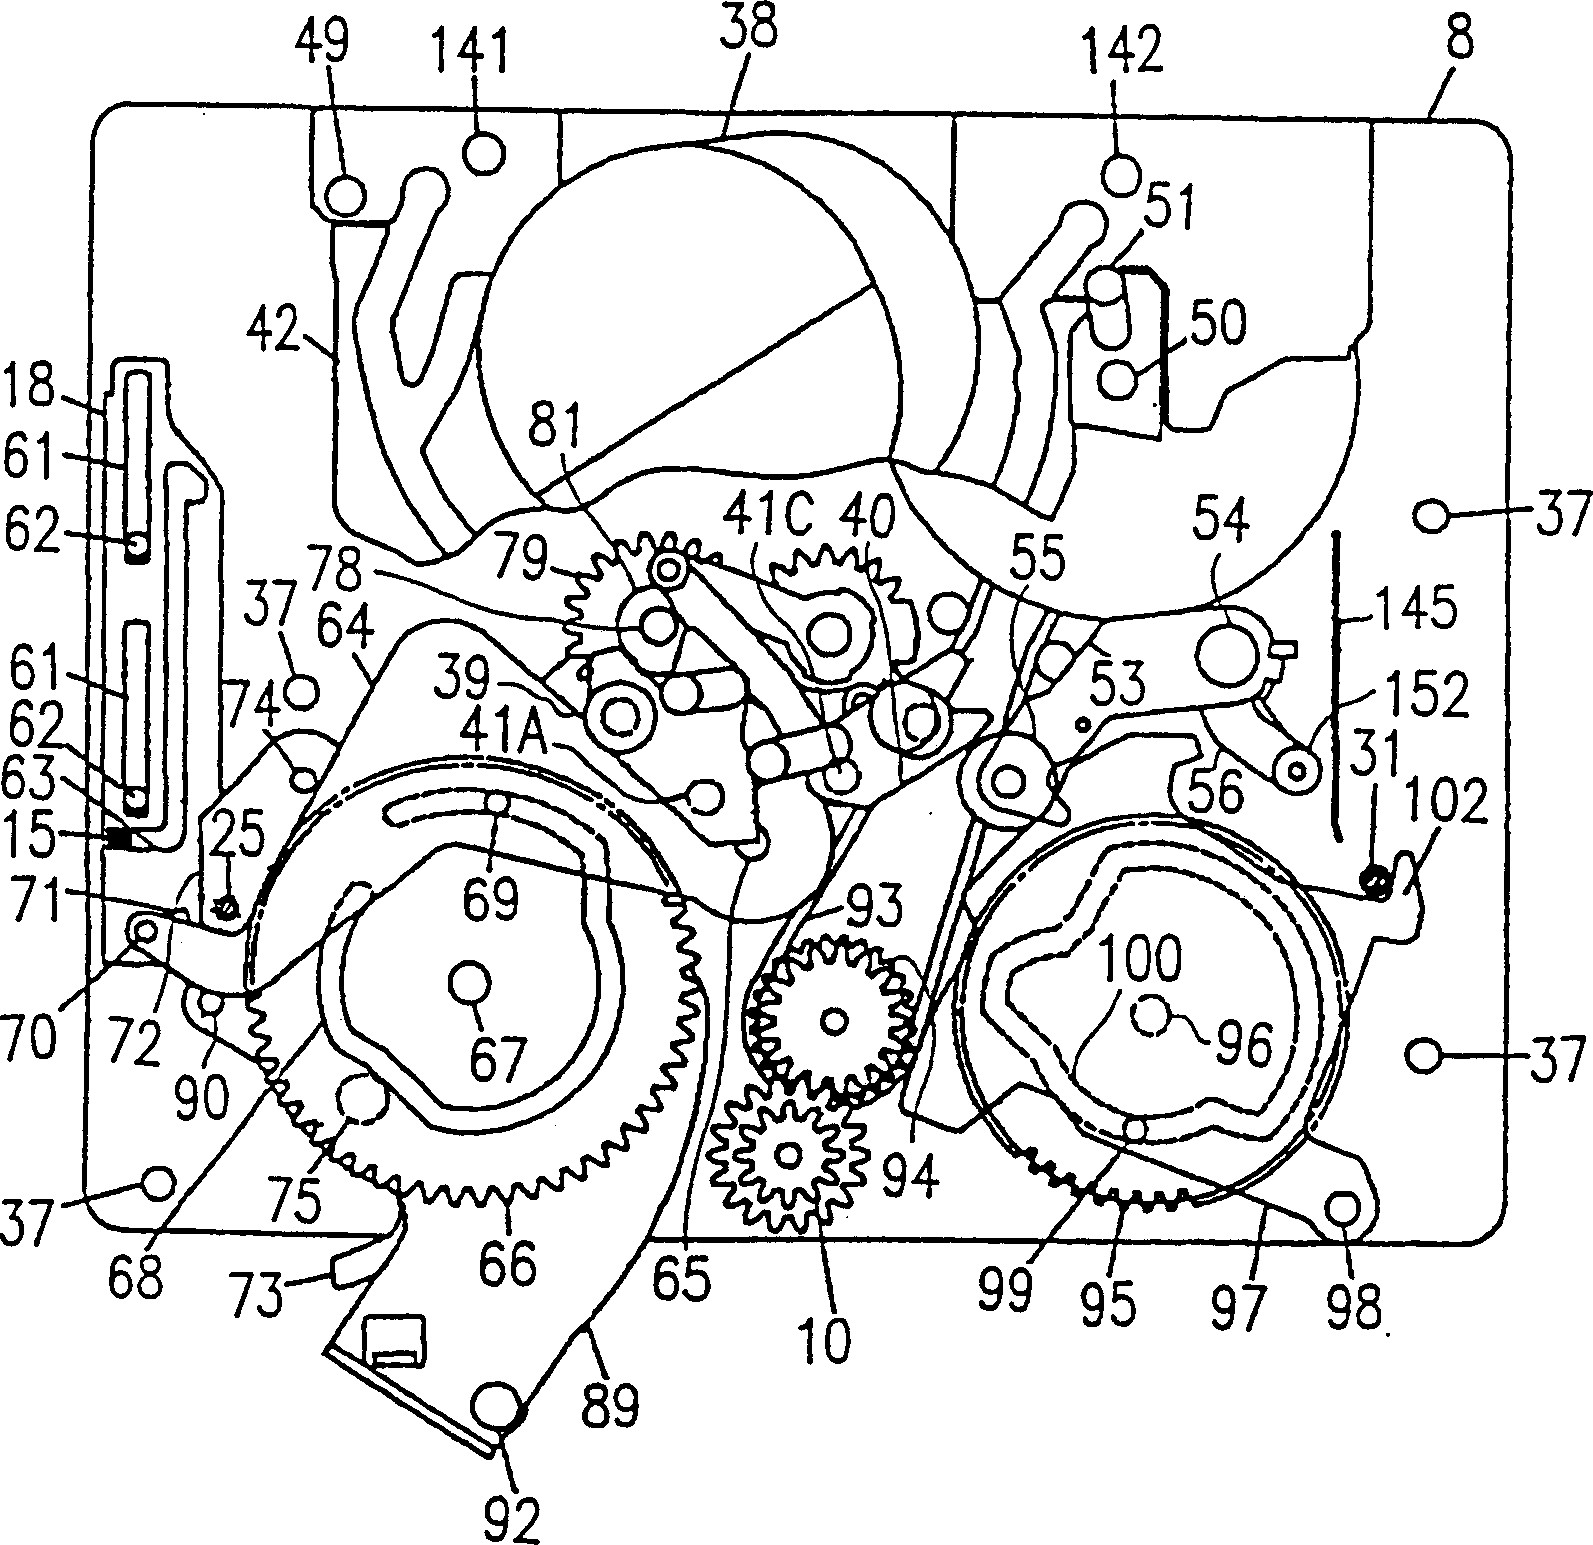 Magnetic recording/reproduction apparatus